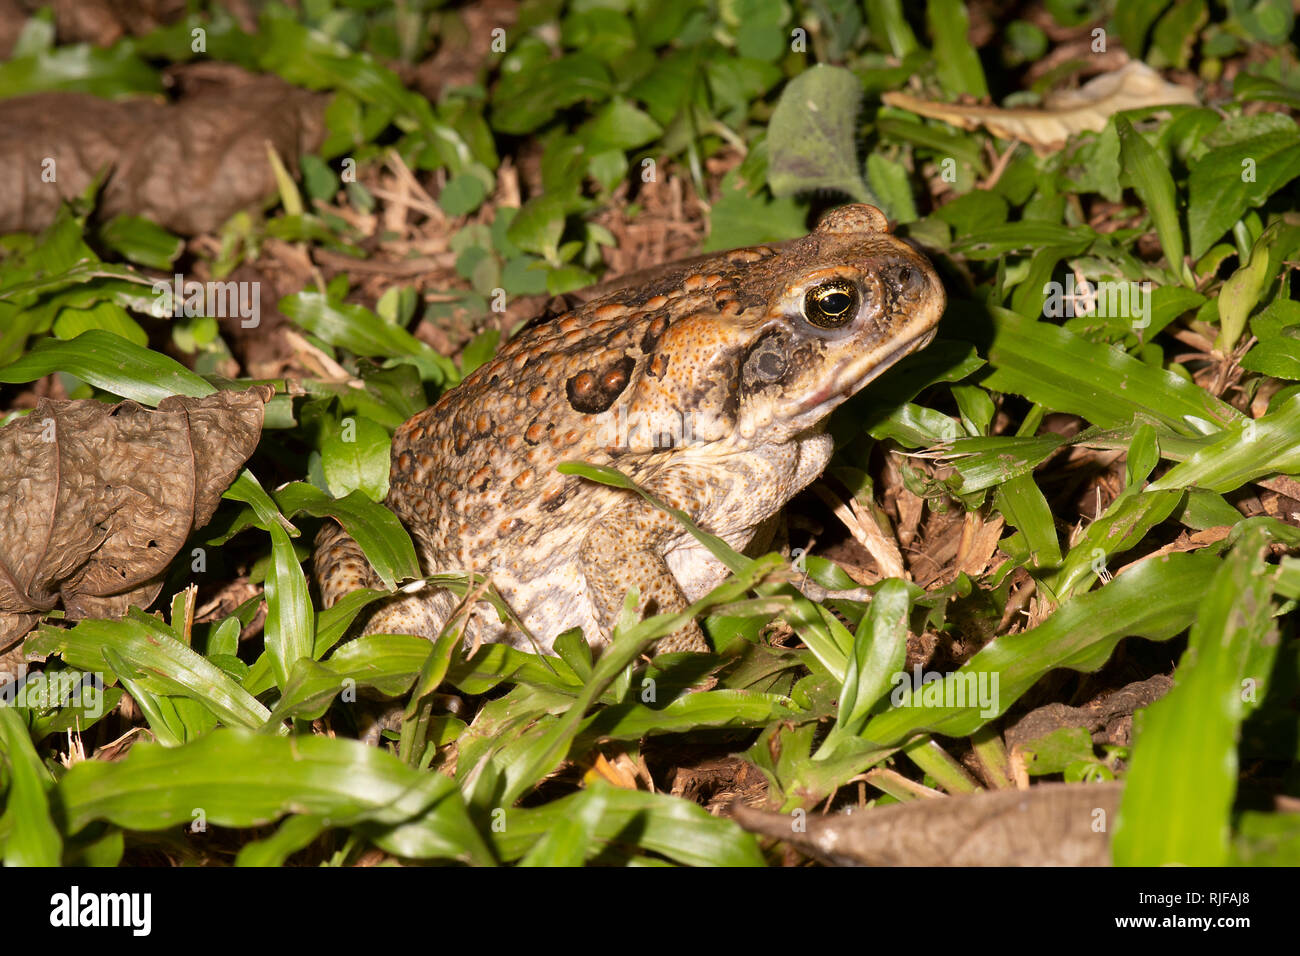 A Cane Toad (Bufo Marinus or Rhinella marina) which is a pest introduced species in Australia Stock Photo